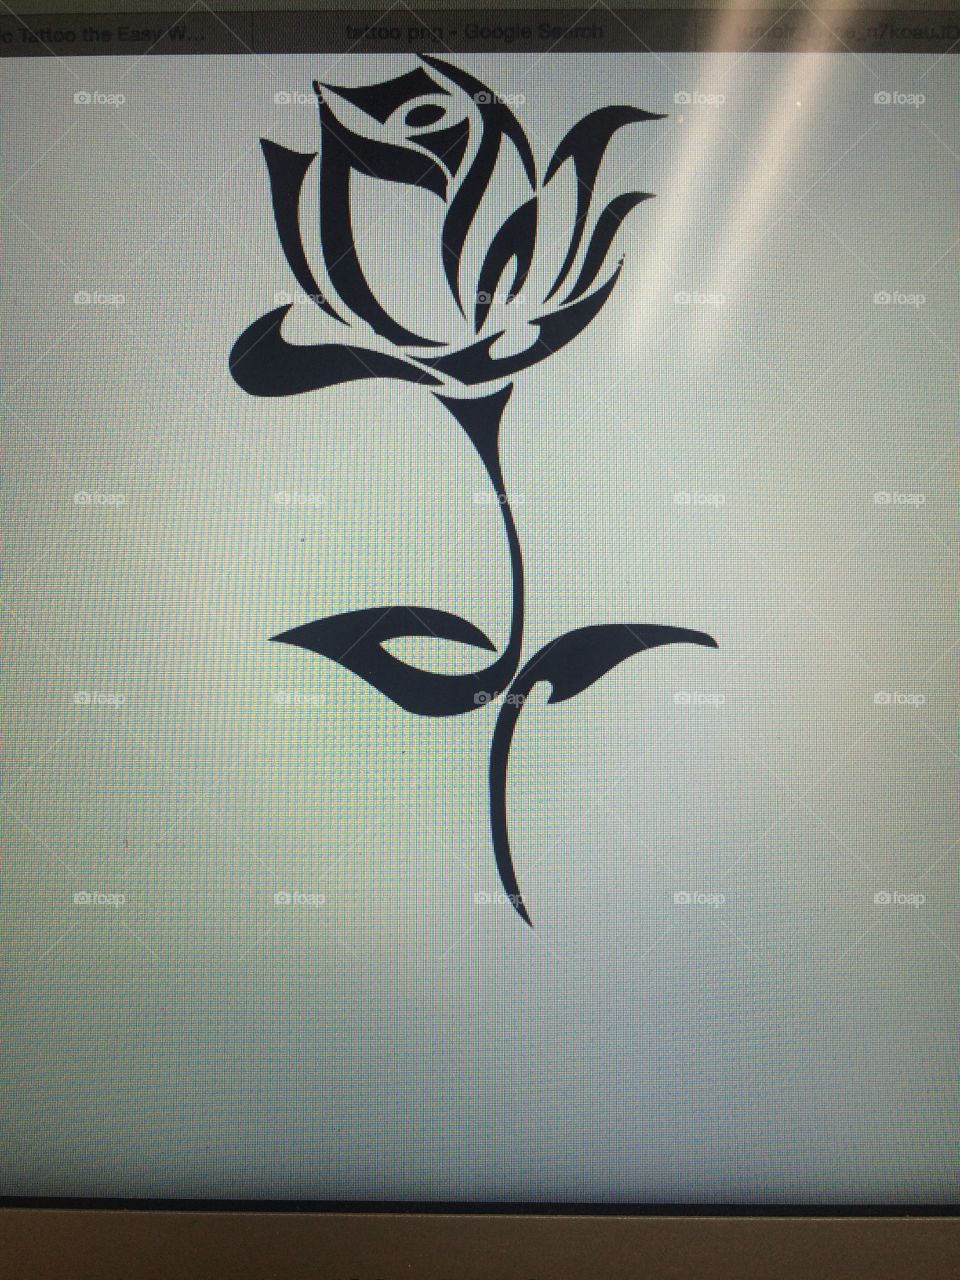 A tattoo of a rose that I want to get